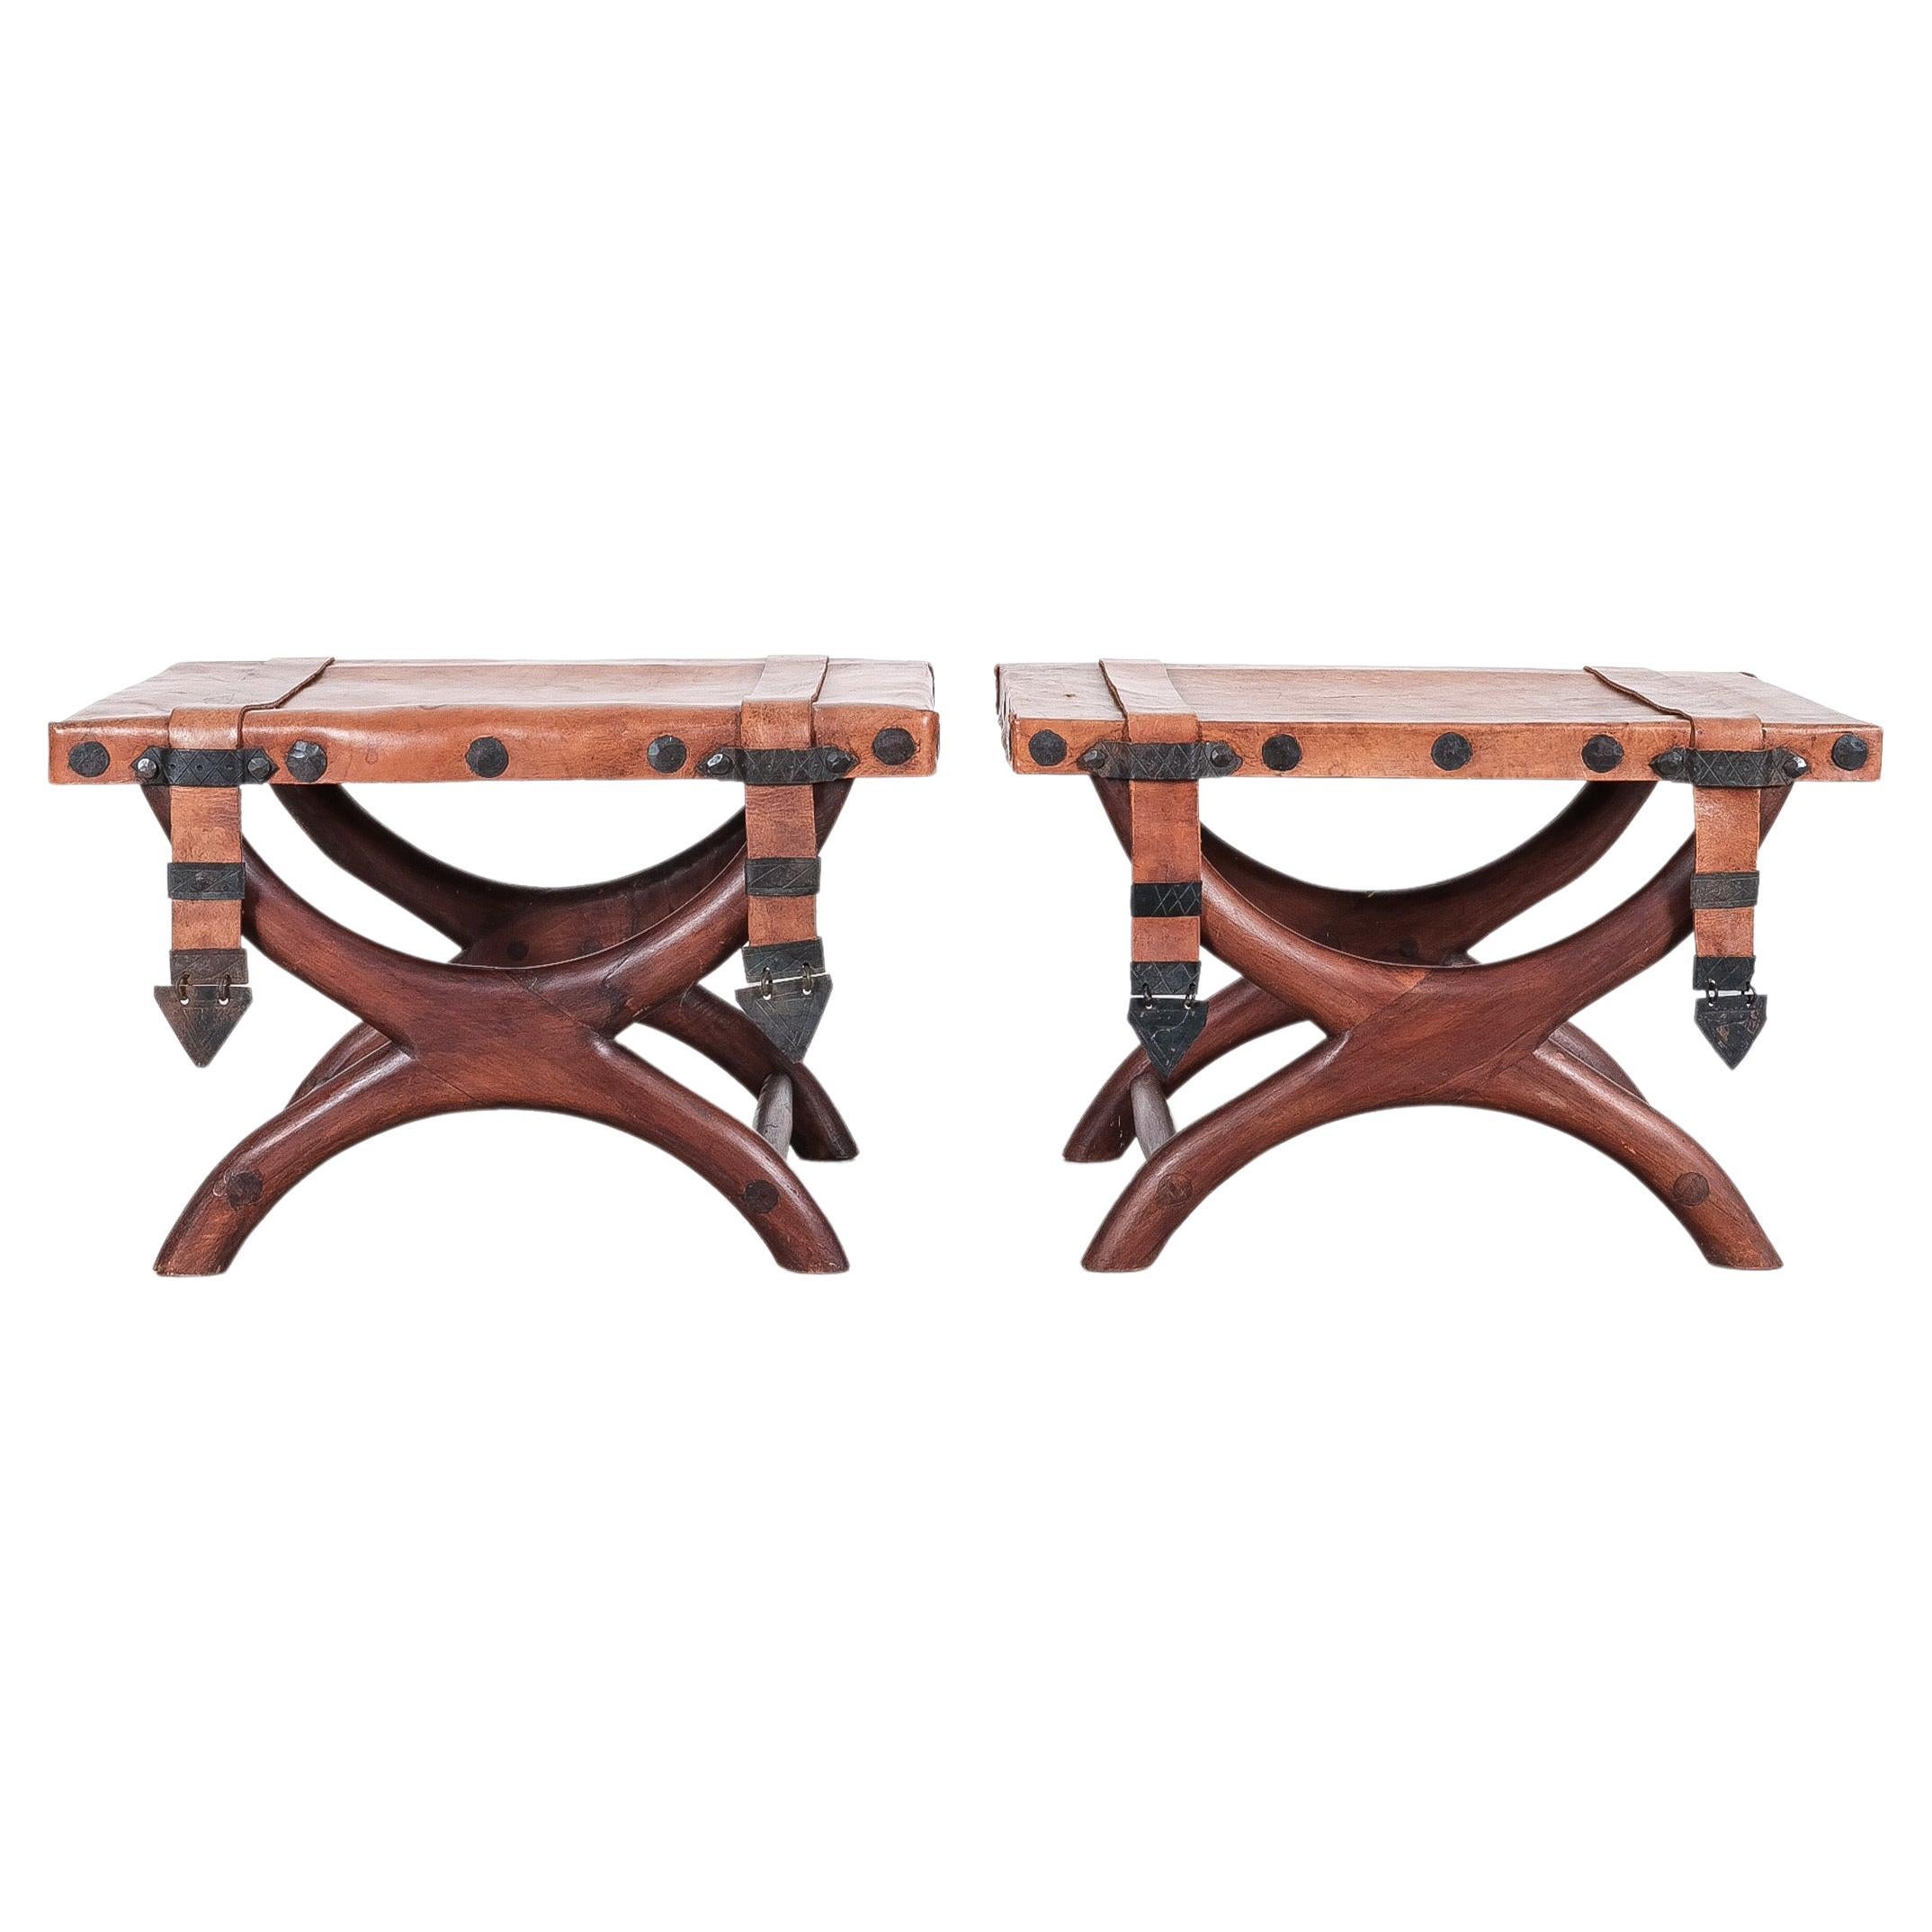 Pair of mid-century Mexican mahogany and leather stools, circa 1940-1950. 

Very hard to find in pairs. 

Nice pair of wooden vintage Spanish Colonial Curule stools with original thick leather covers and wrought iron knobs in good condition. It has